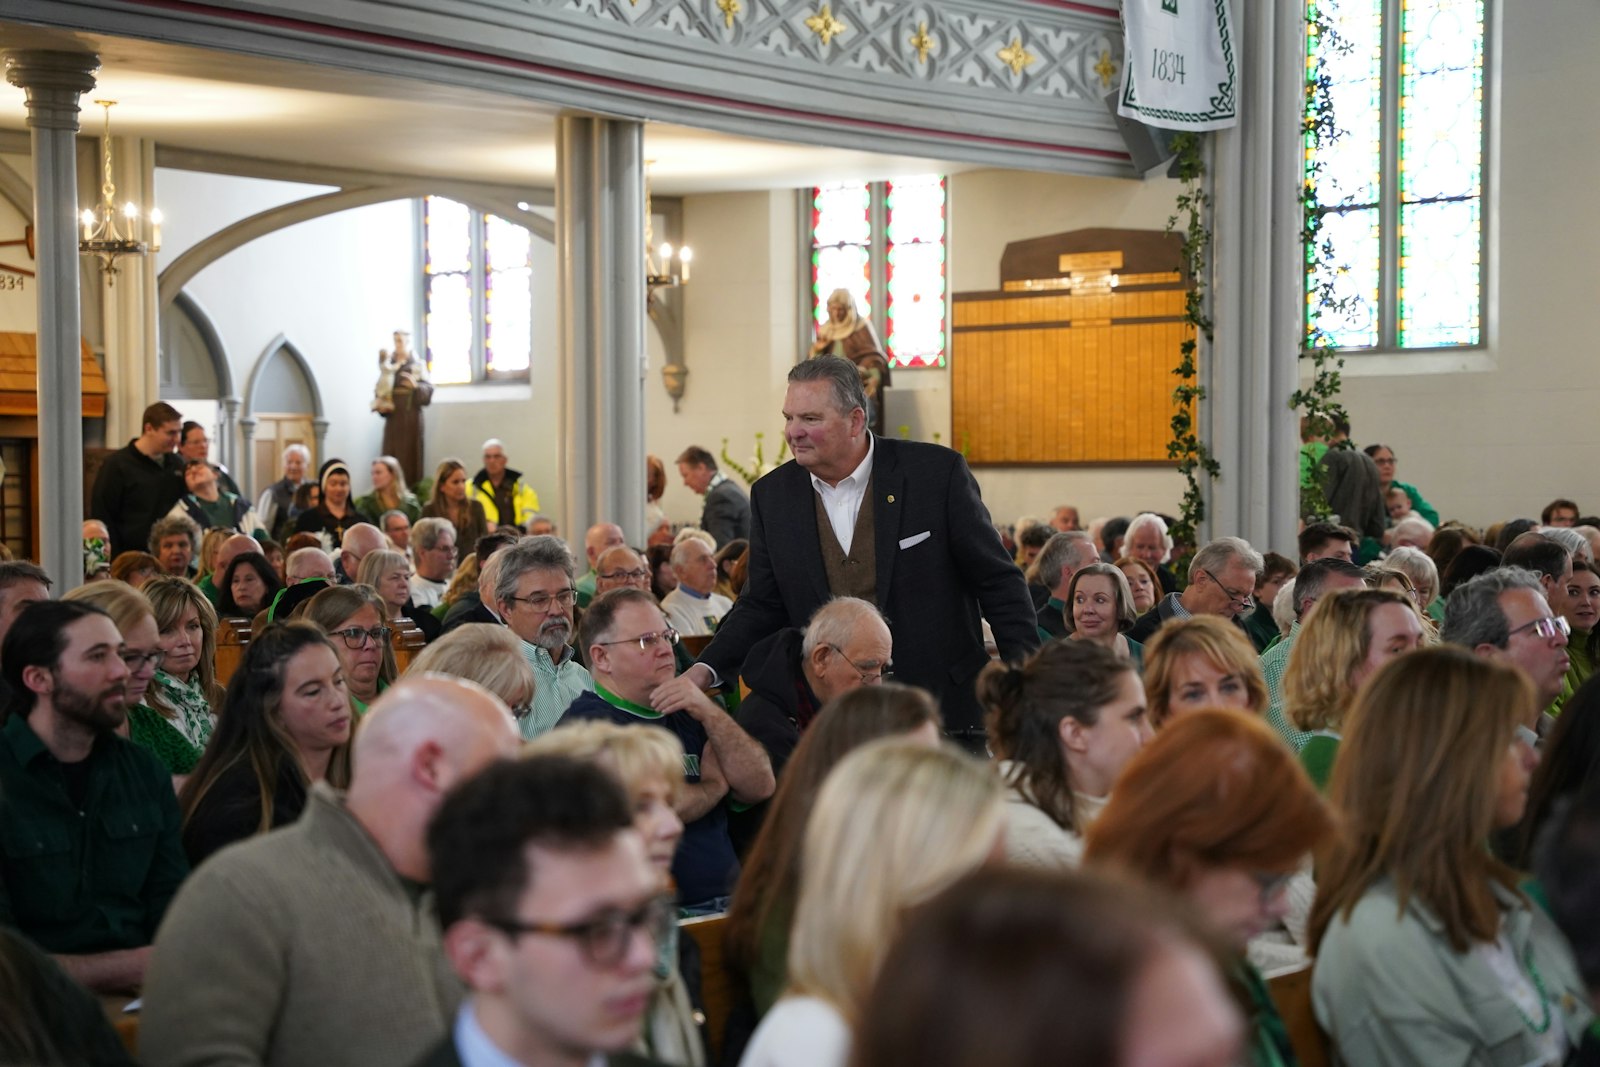 The 80th annual "Sharin' o' the Green" supports the various ministries and services provided at Most Holy Trinity. The fundraiser was started by famed Most Holy Trinity pastor Msgr. Clement Kern and remains a vital part of the parish's mission to serve the Corktown community.